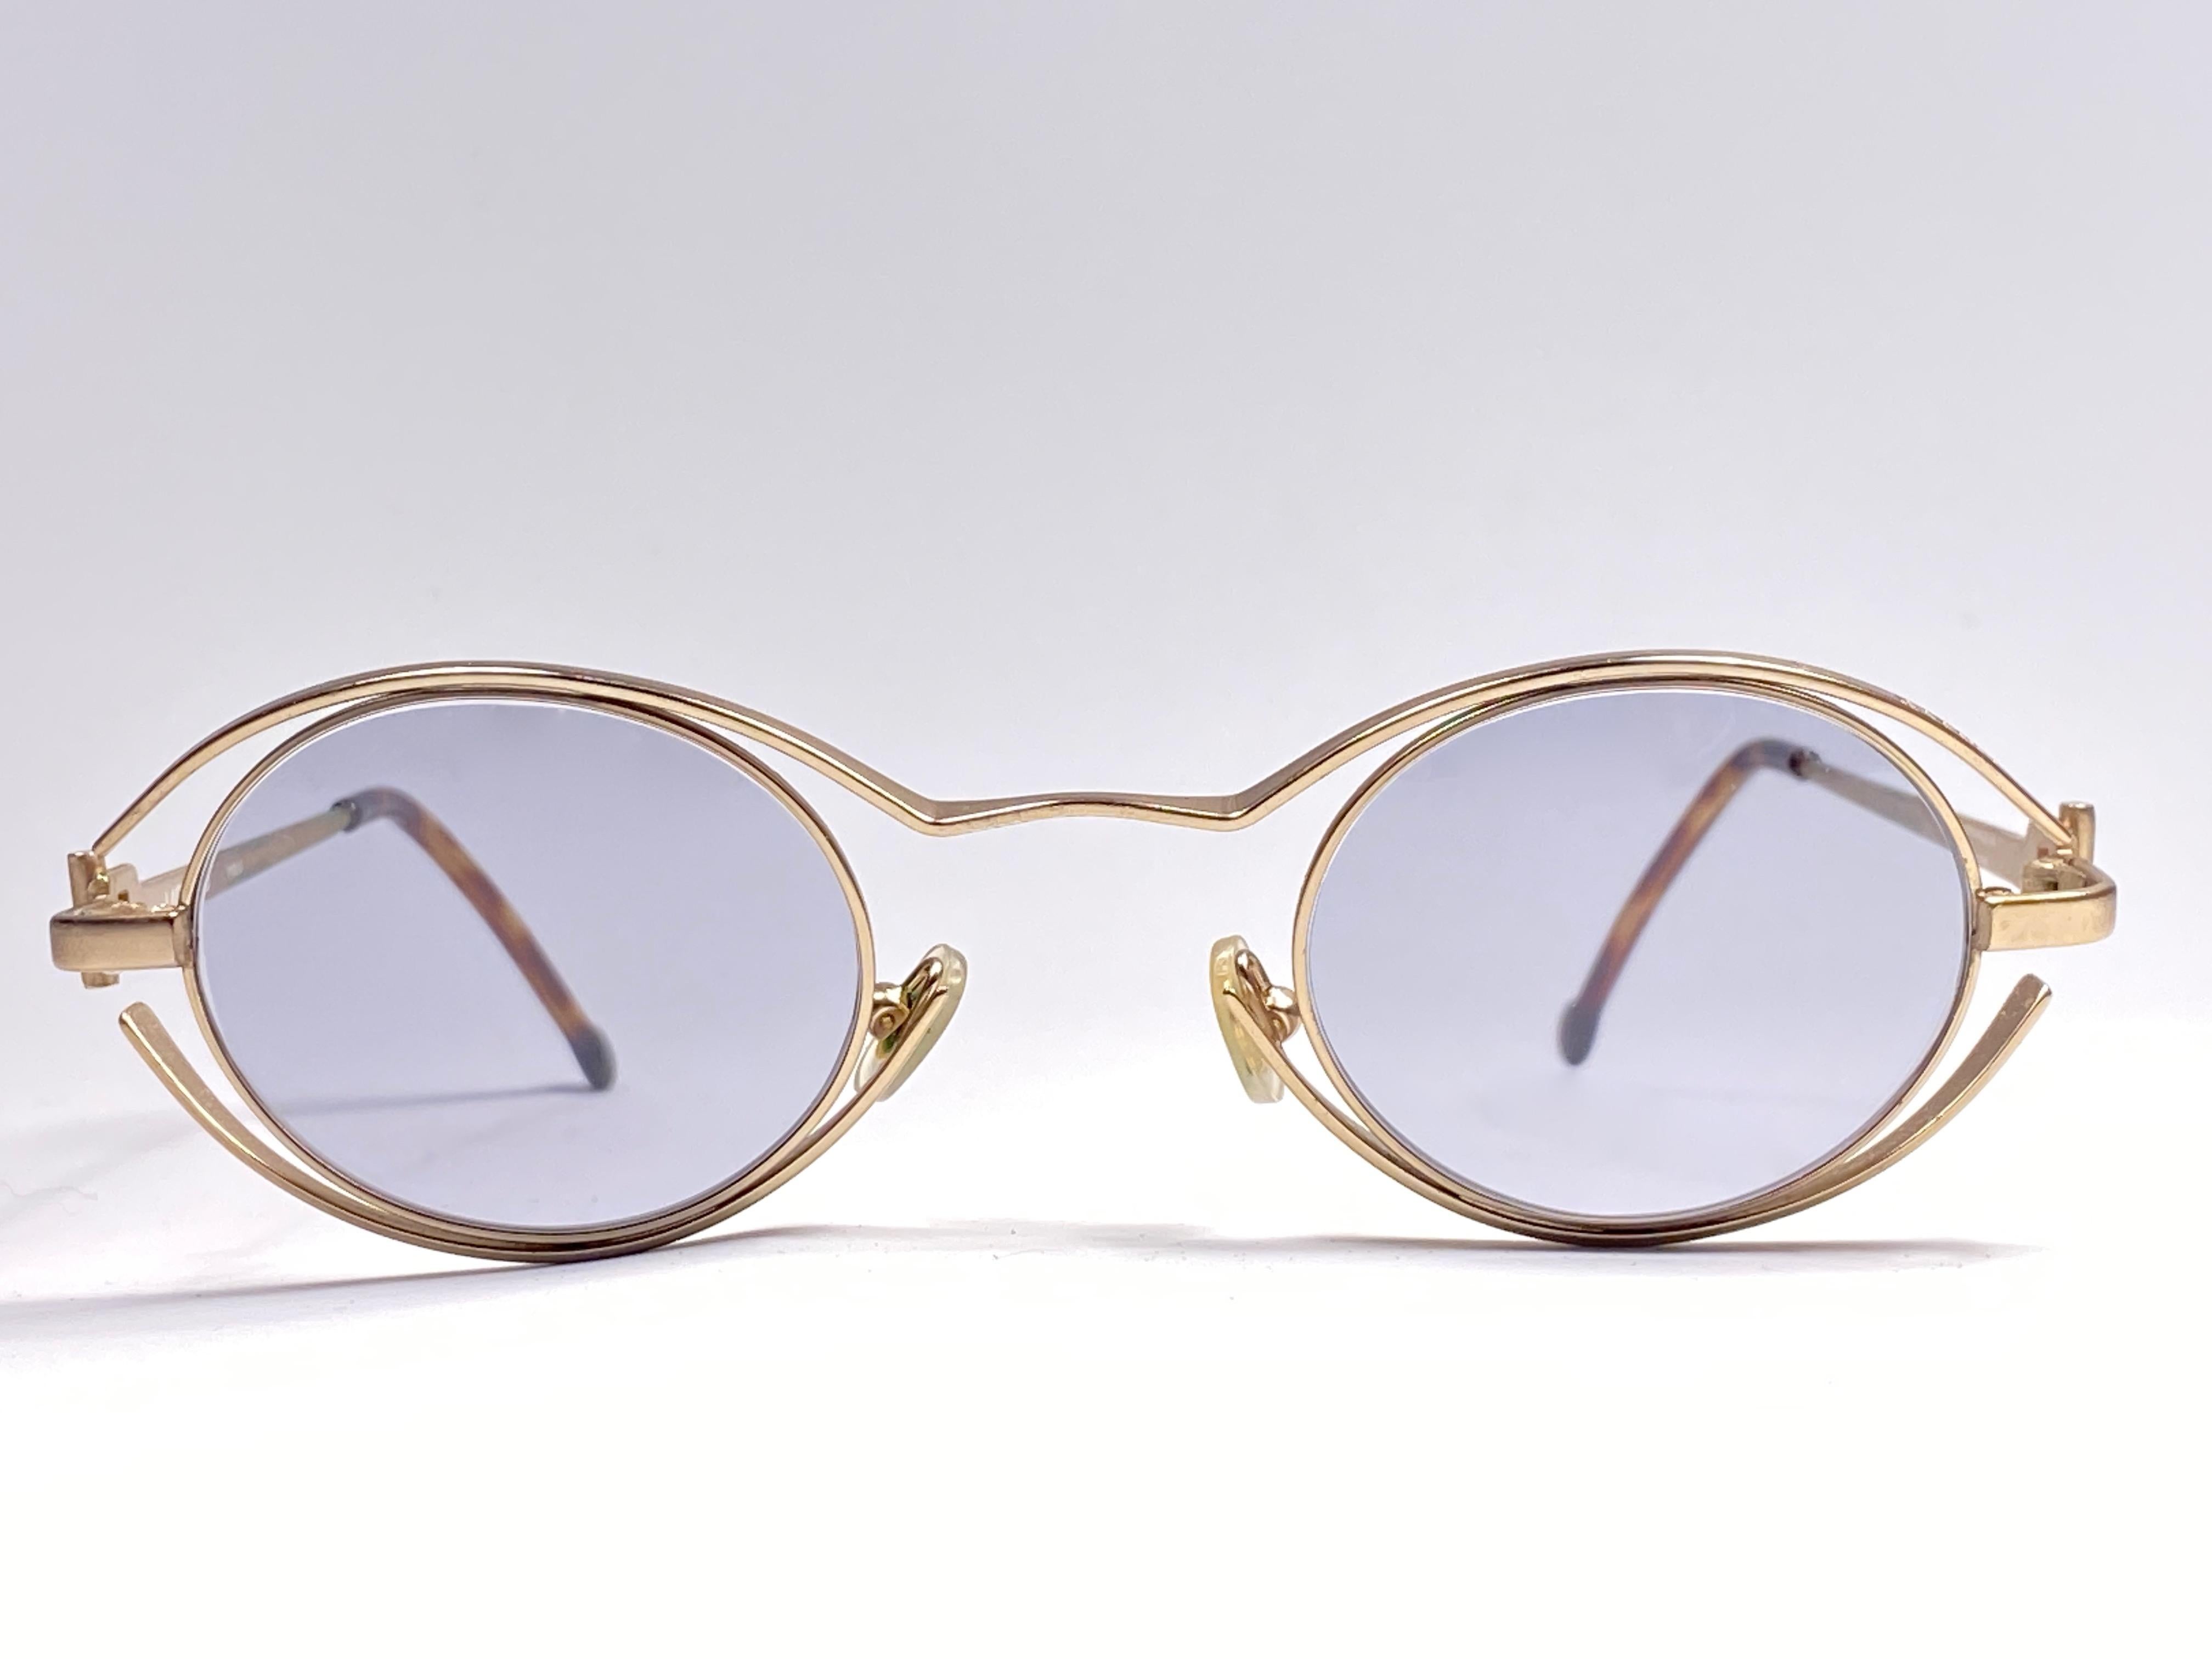 New Vintage amazing pair of vintage 1980's 4123 Karl Lagerfeld oval matte gold sunglasses framing a pair of light grey lenses.
 
 New, never worn or displayed. Designed and produced in France.

This item may show minor sign of wear due to storage.
